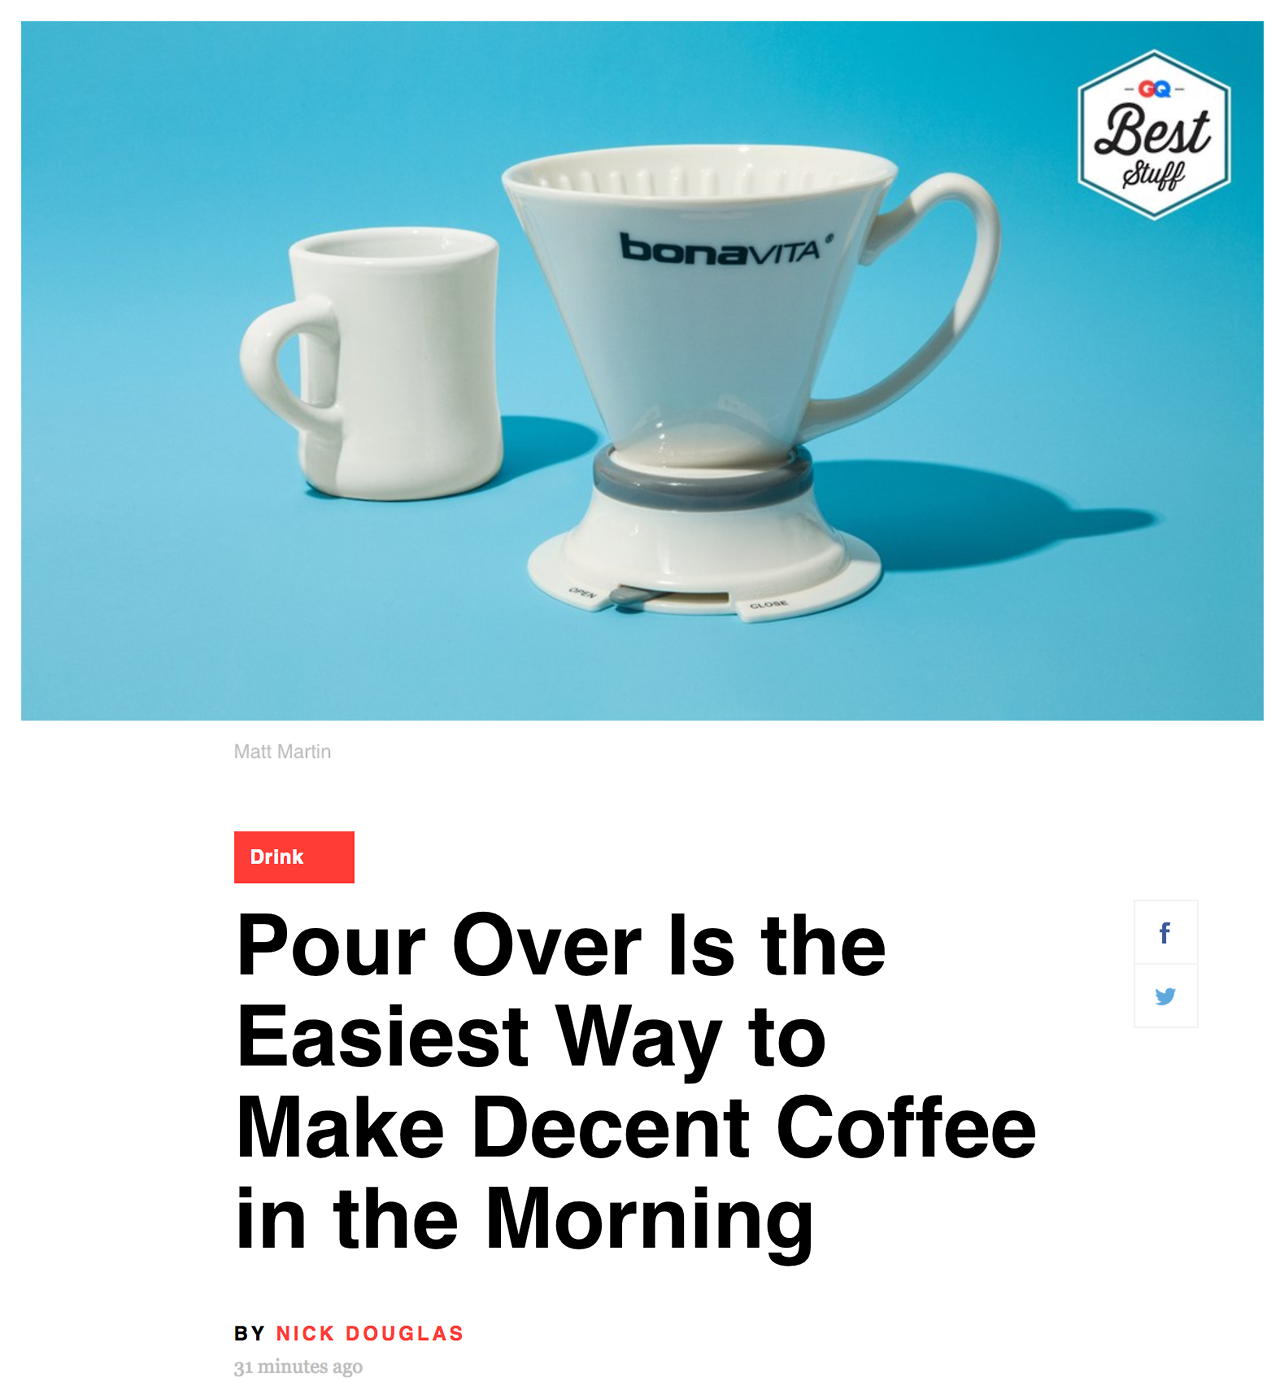 Pour Over Is the Easiest Way to Make Decent Coffee in the Morning